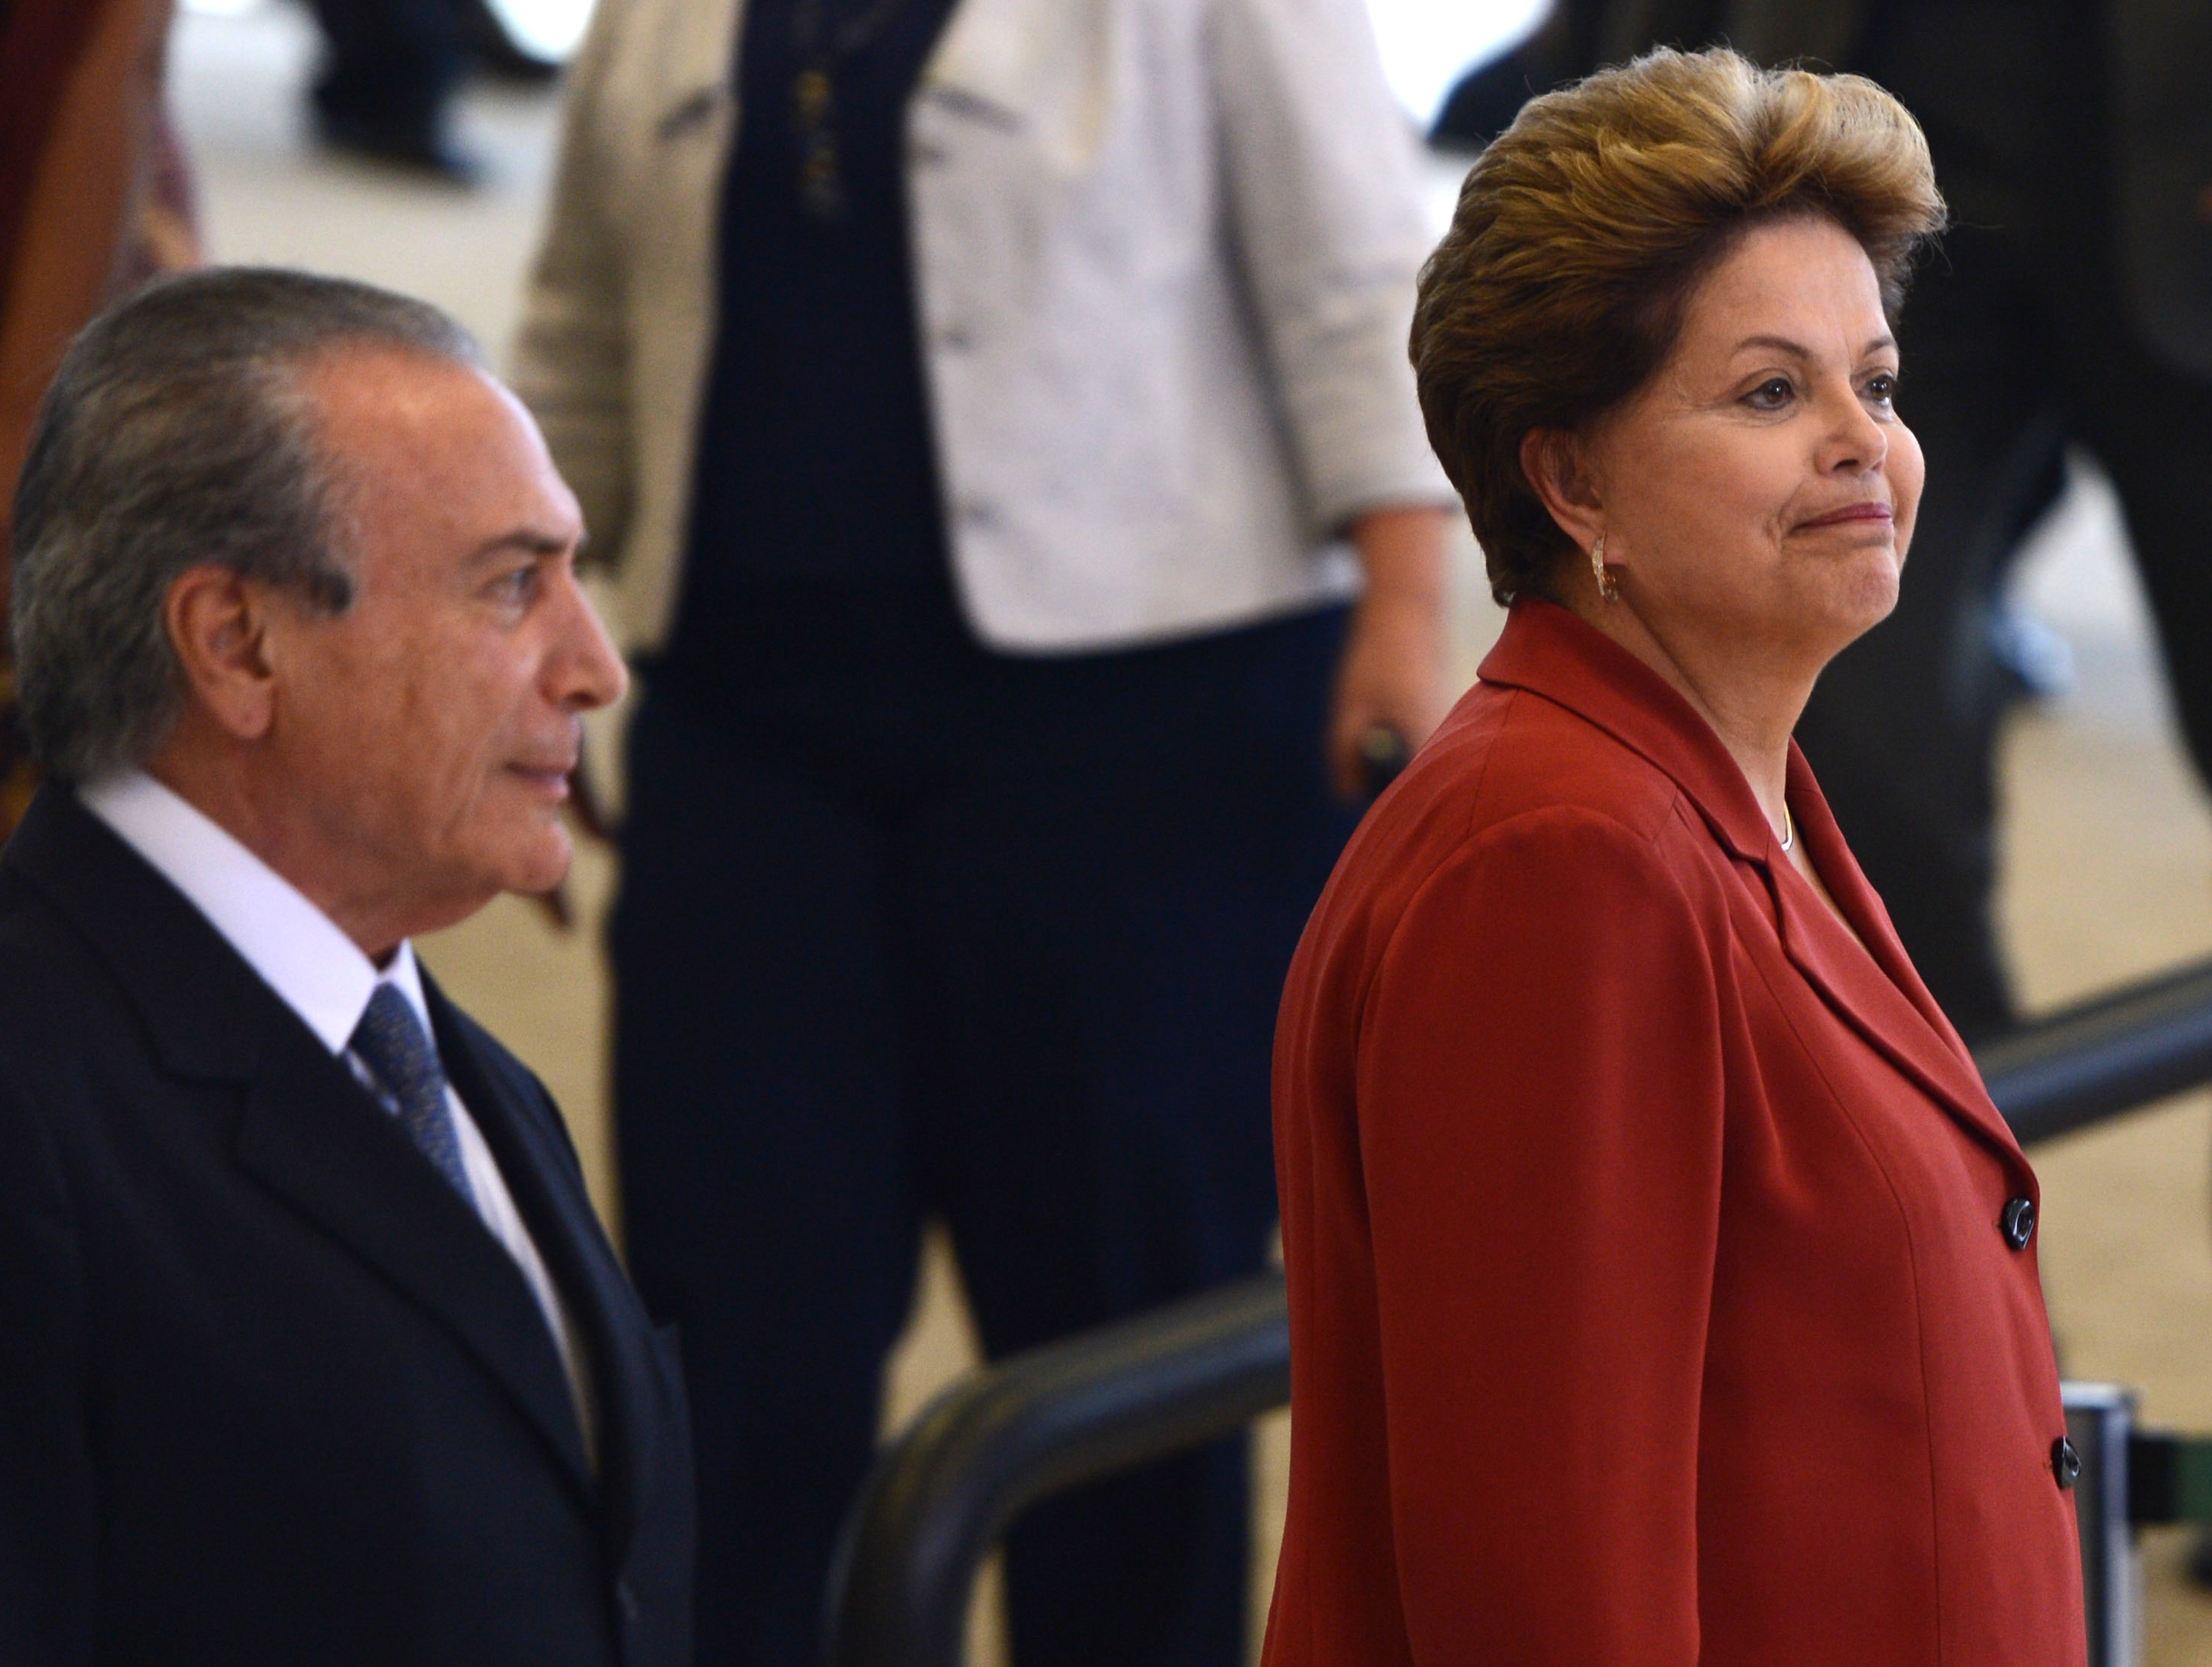 Brazilian President Dilma Rousseff, seen here alongside with Vice President Michel Temer, said if true the allegations could amount of violation of sovereignty and freedom of expression, photo by Fabio Rodrigues Pozzebom/ABr.